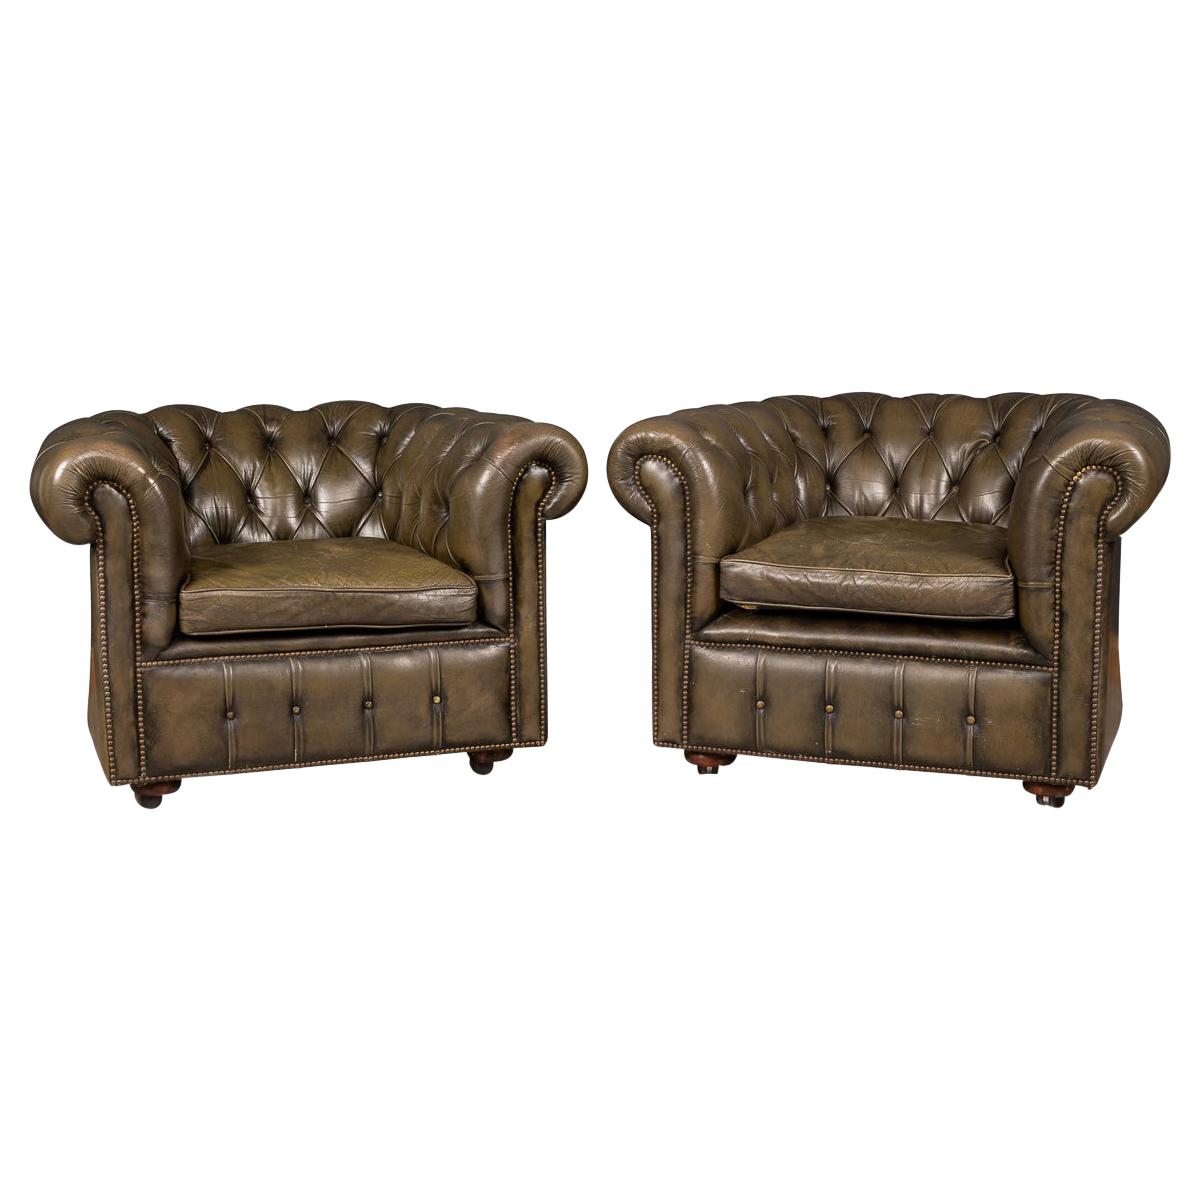 20th Century Pair of Chesterfield Leather Armchairs, circa 1970